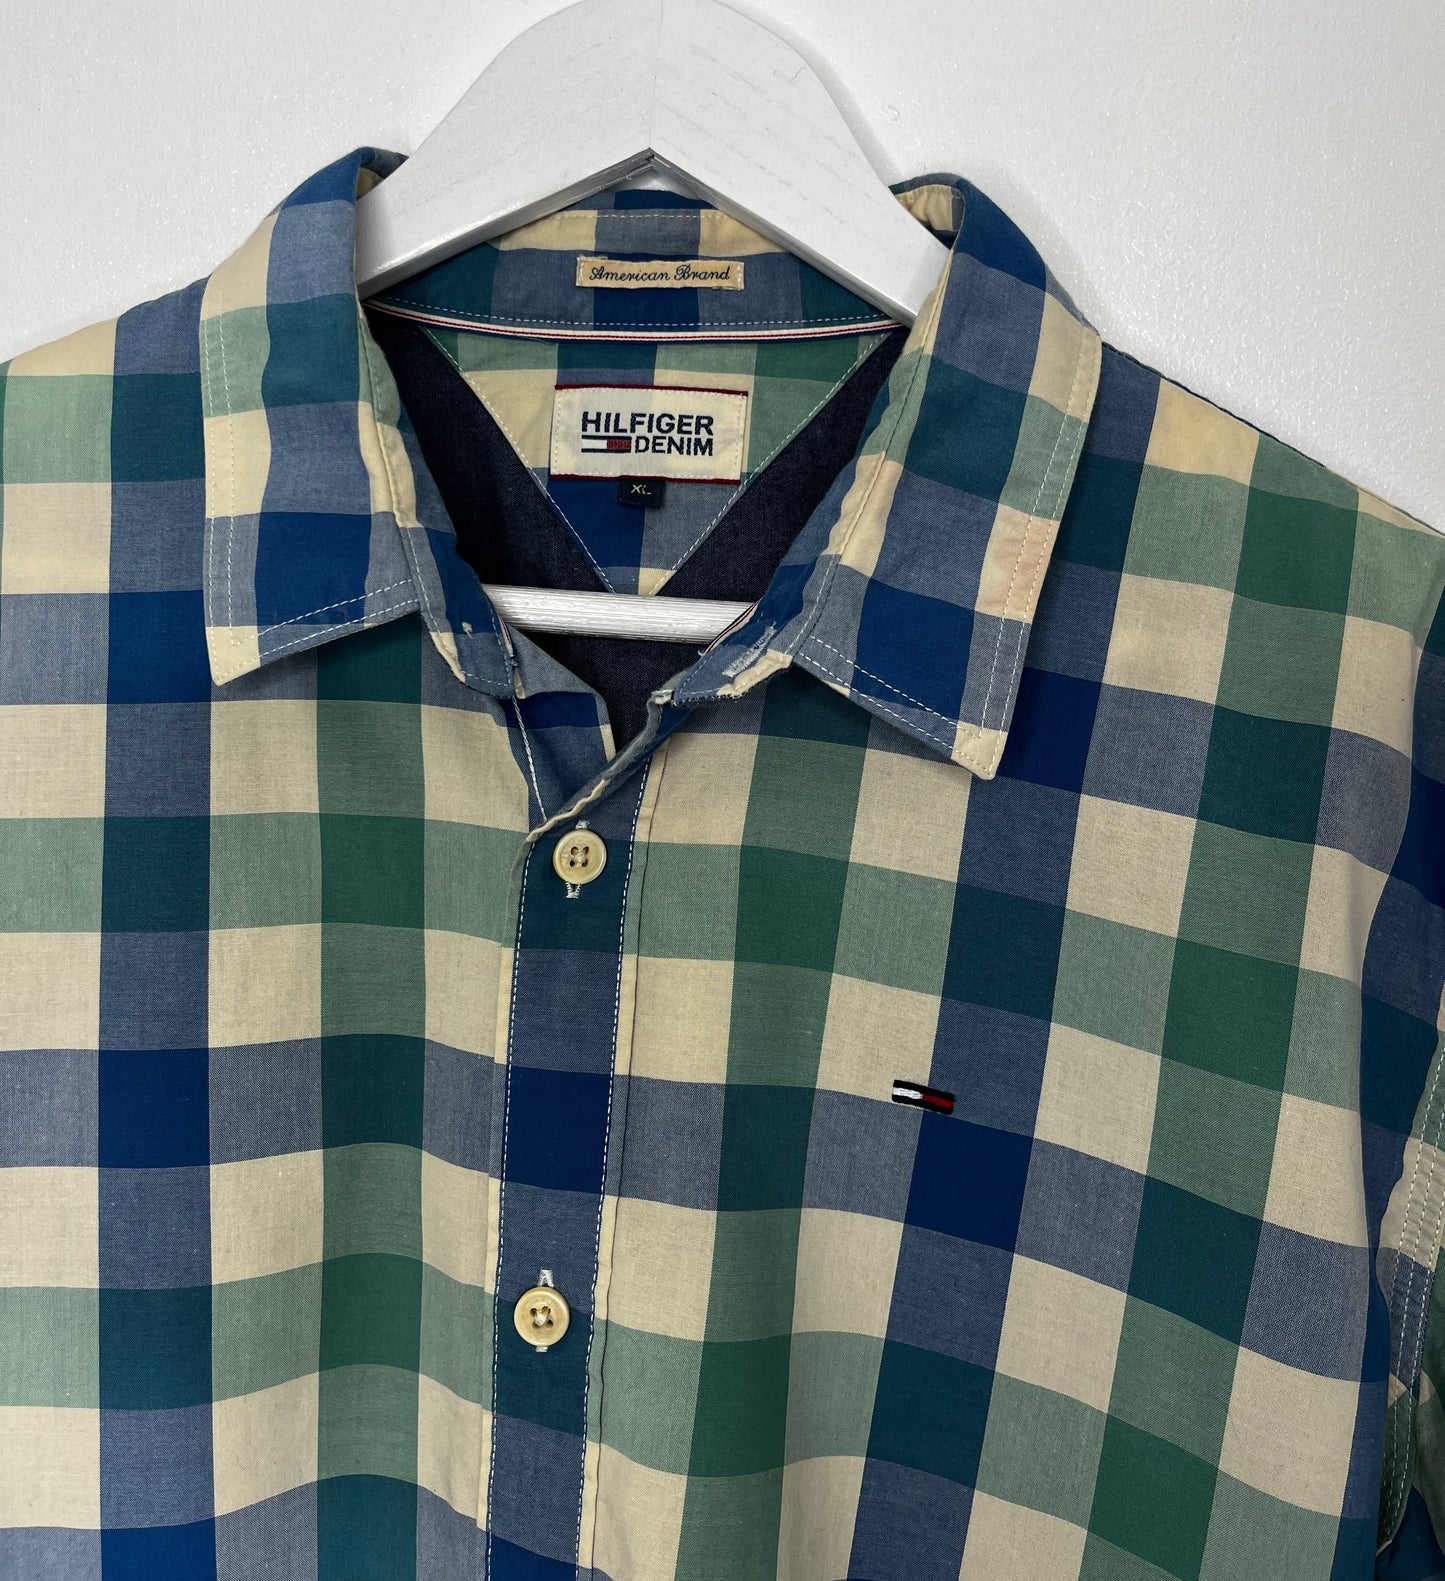 Tommy Hilfiger Checked Shirt